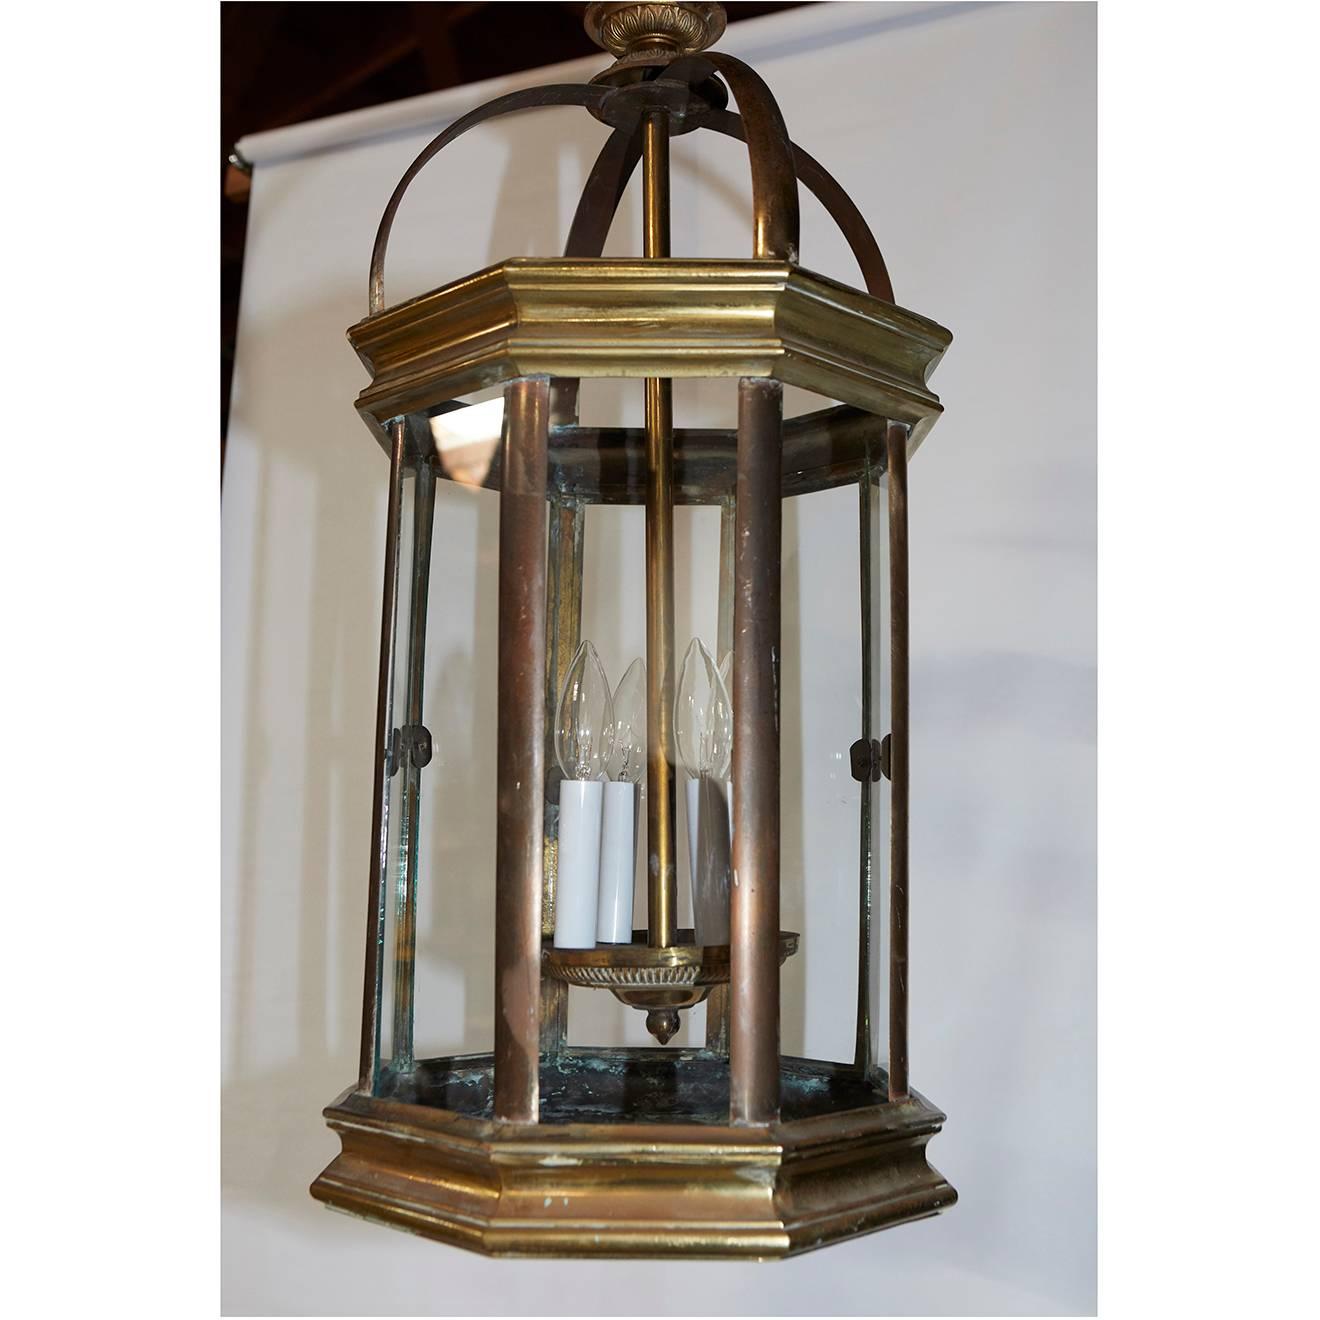 This pair of original English lanterns were gas lamps converted to electricity with four candle stick lights. They are quality crafted in solid brass with brass plating and removable glass panels. The lanterns have been recently re-wired for US